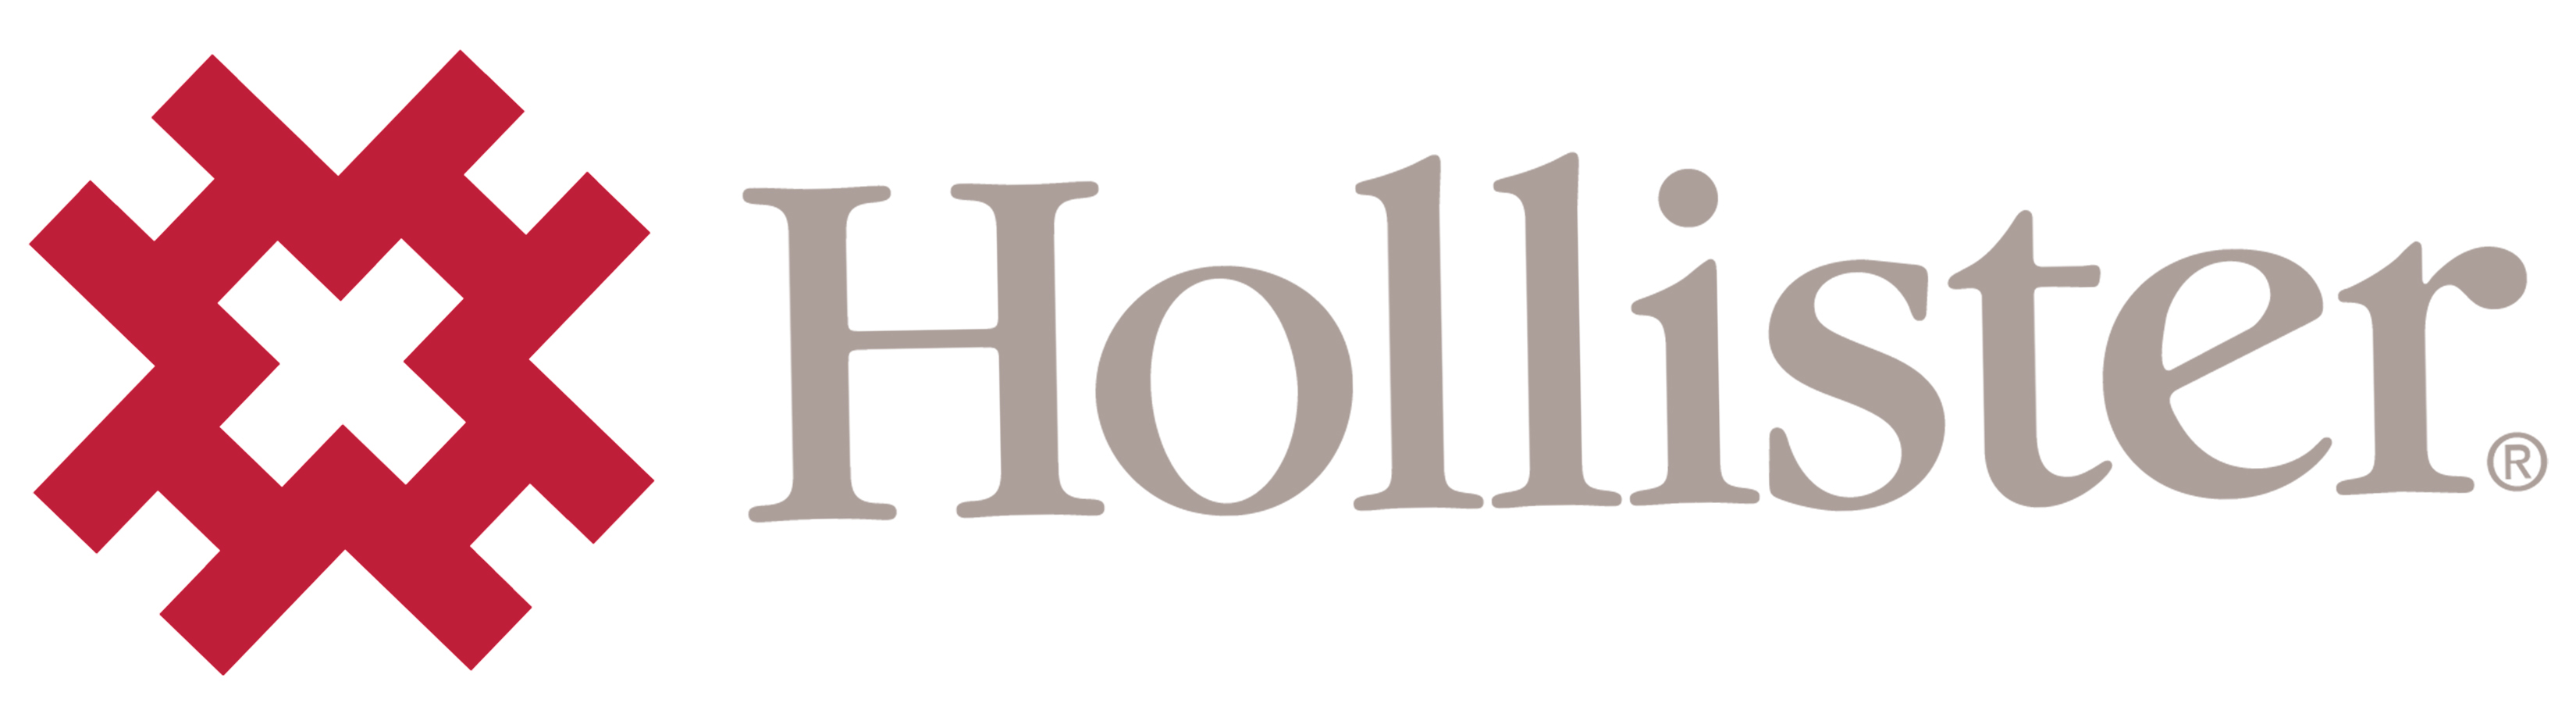 Hollister Ostomy Pouches – Healthgear Medical & Safety Inc.